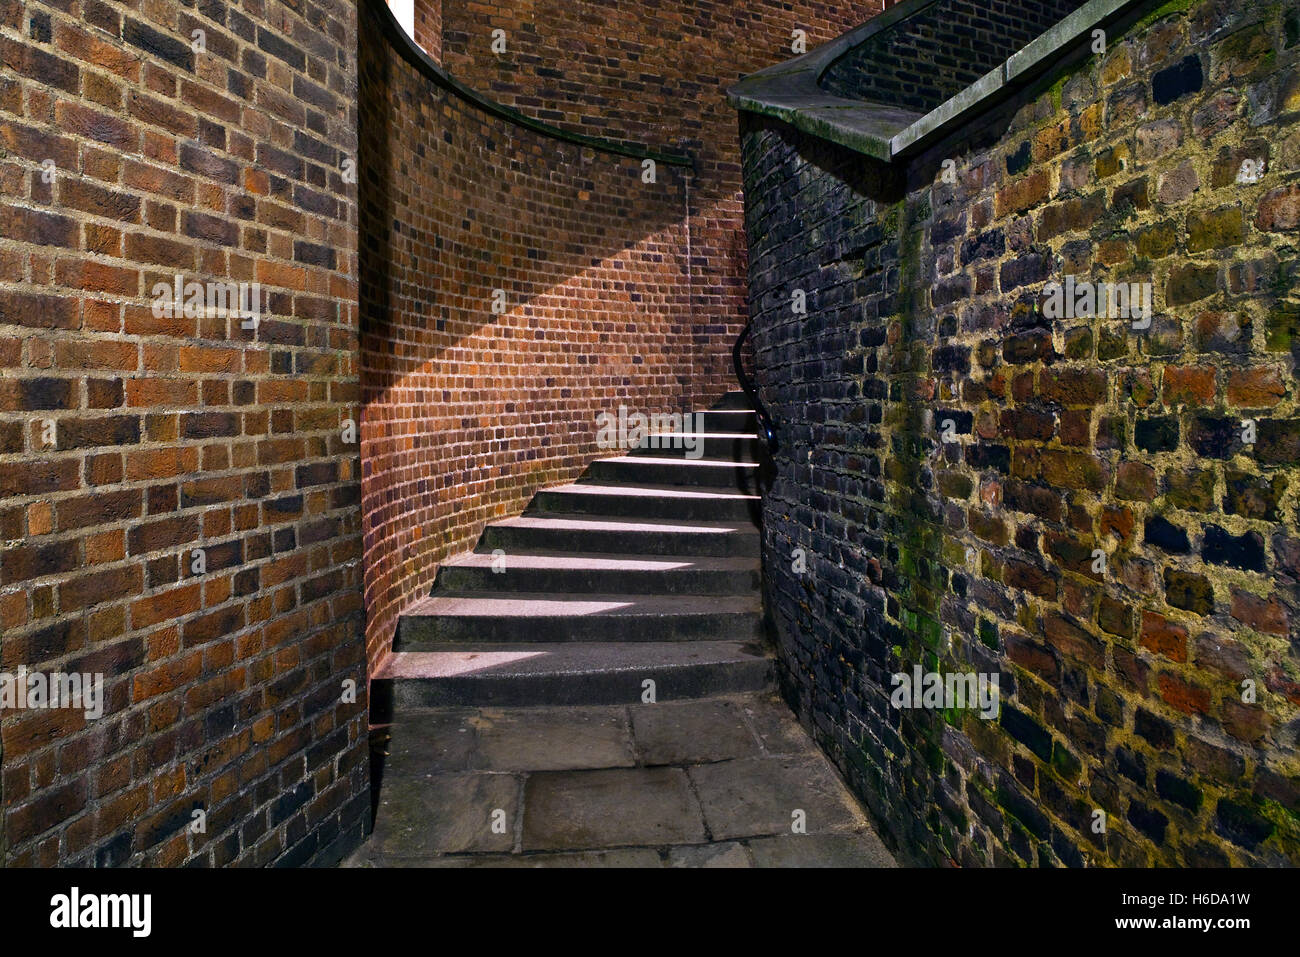 A night-time view of an eerie urban staircase in an alleyway. Stock Photo